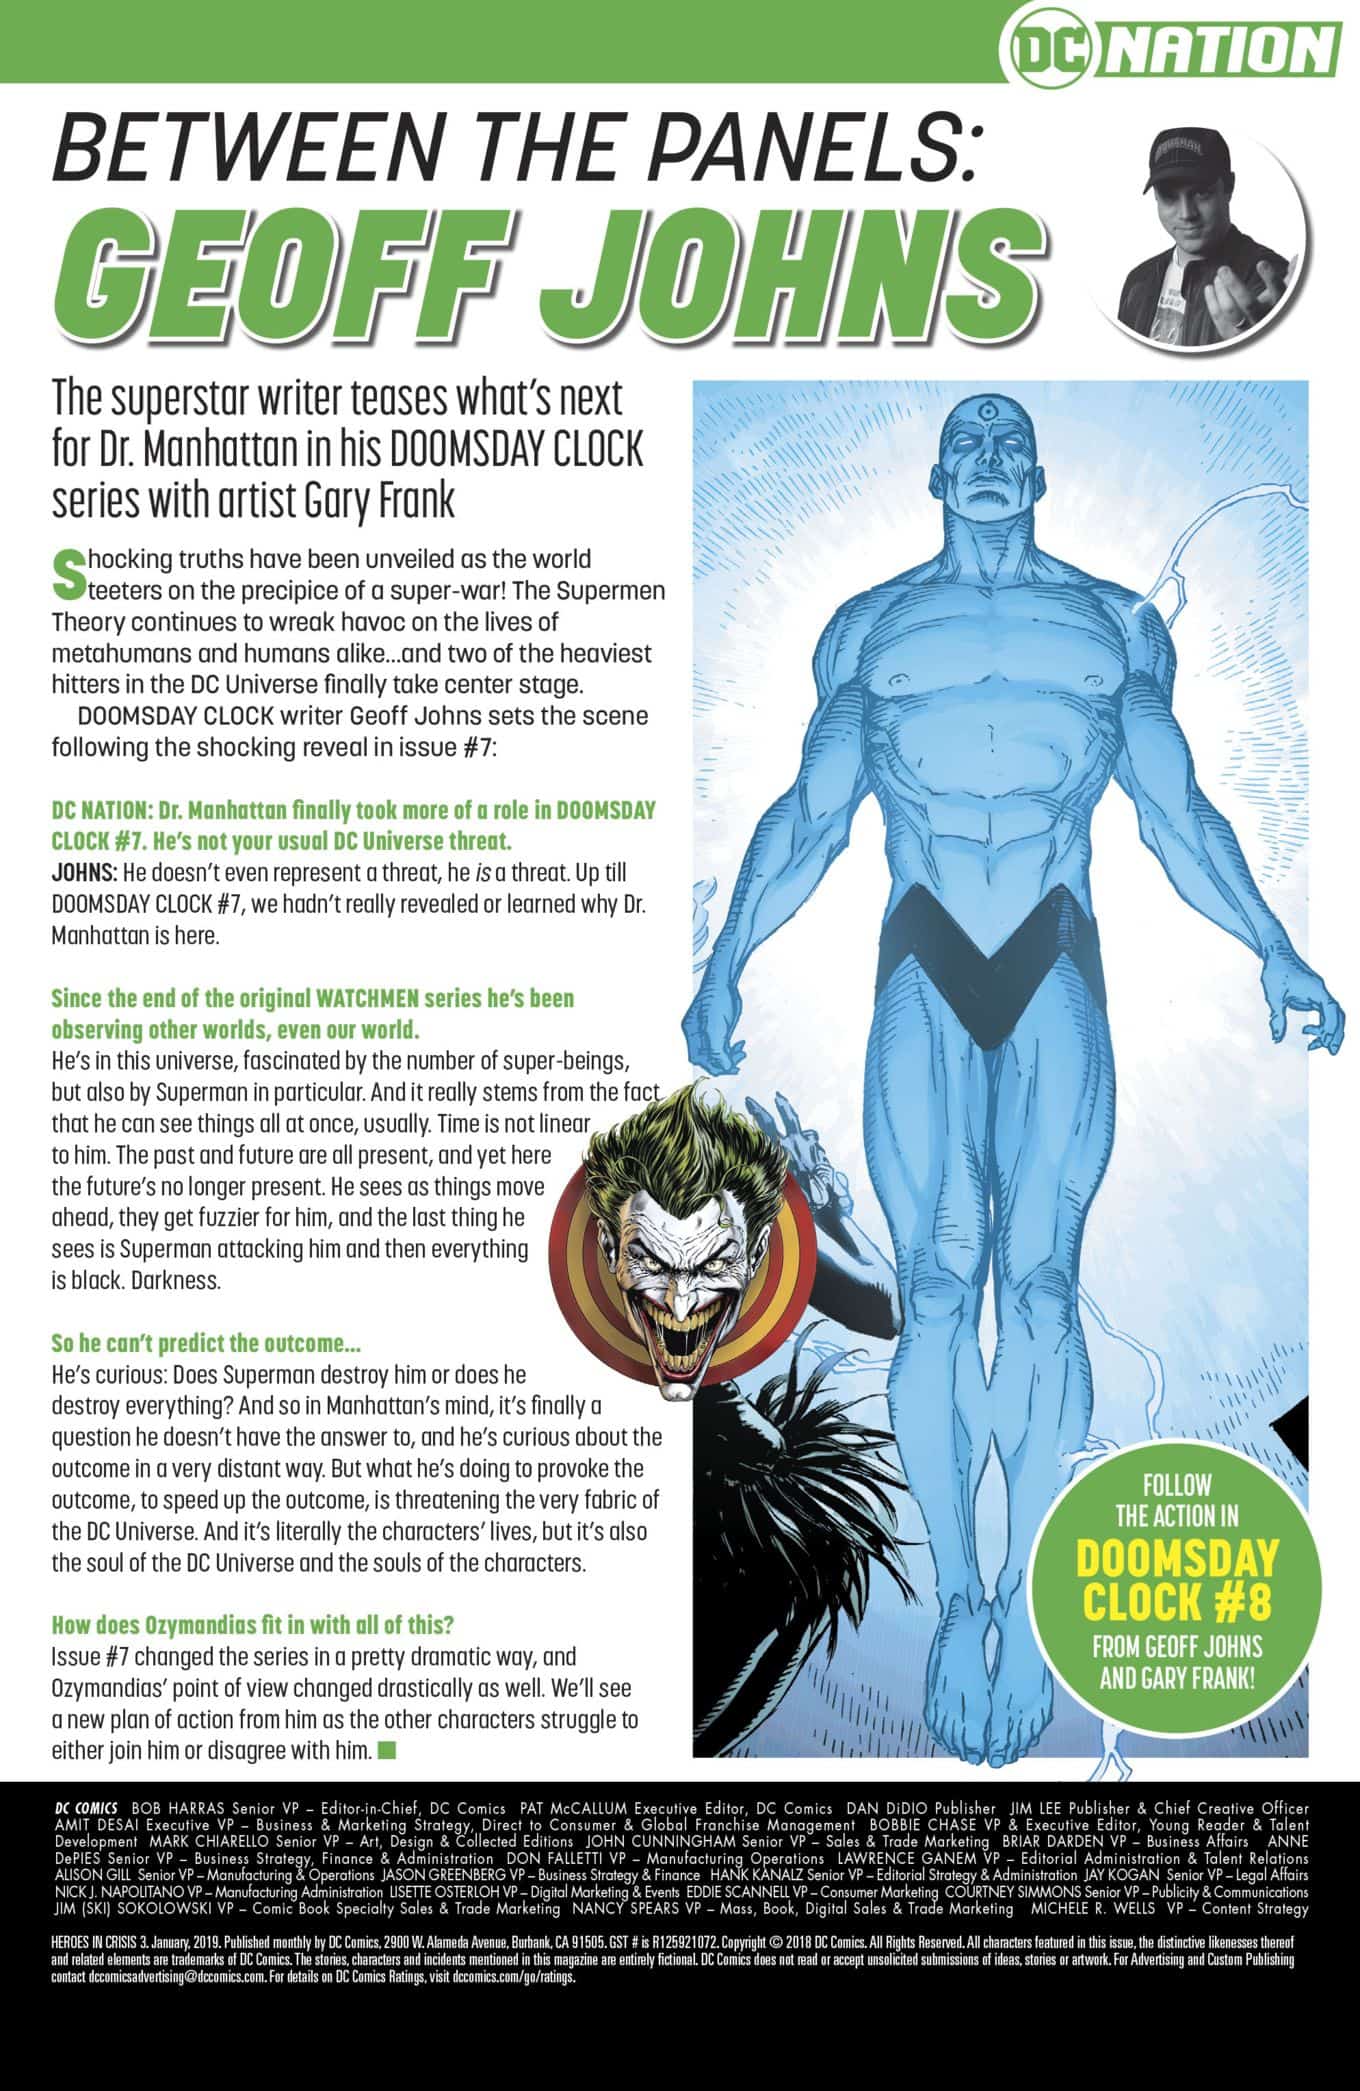 DC Comics Universe & Doomsday Clock #8 Spoilers: Geoff Johns Teases Next Issue Of The ...1988 x 3056